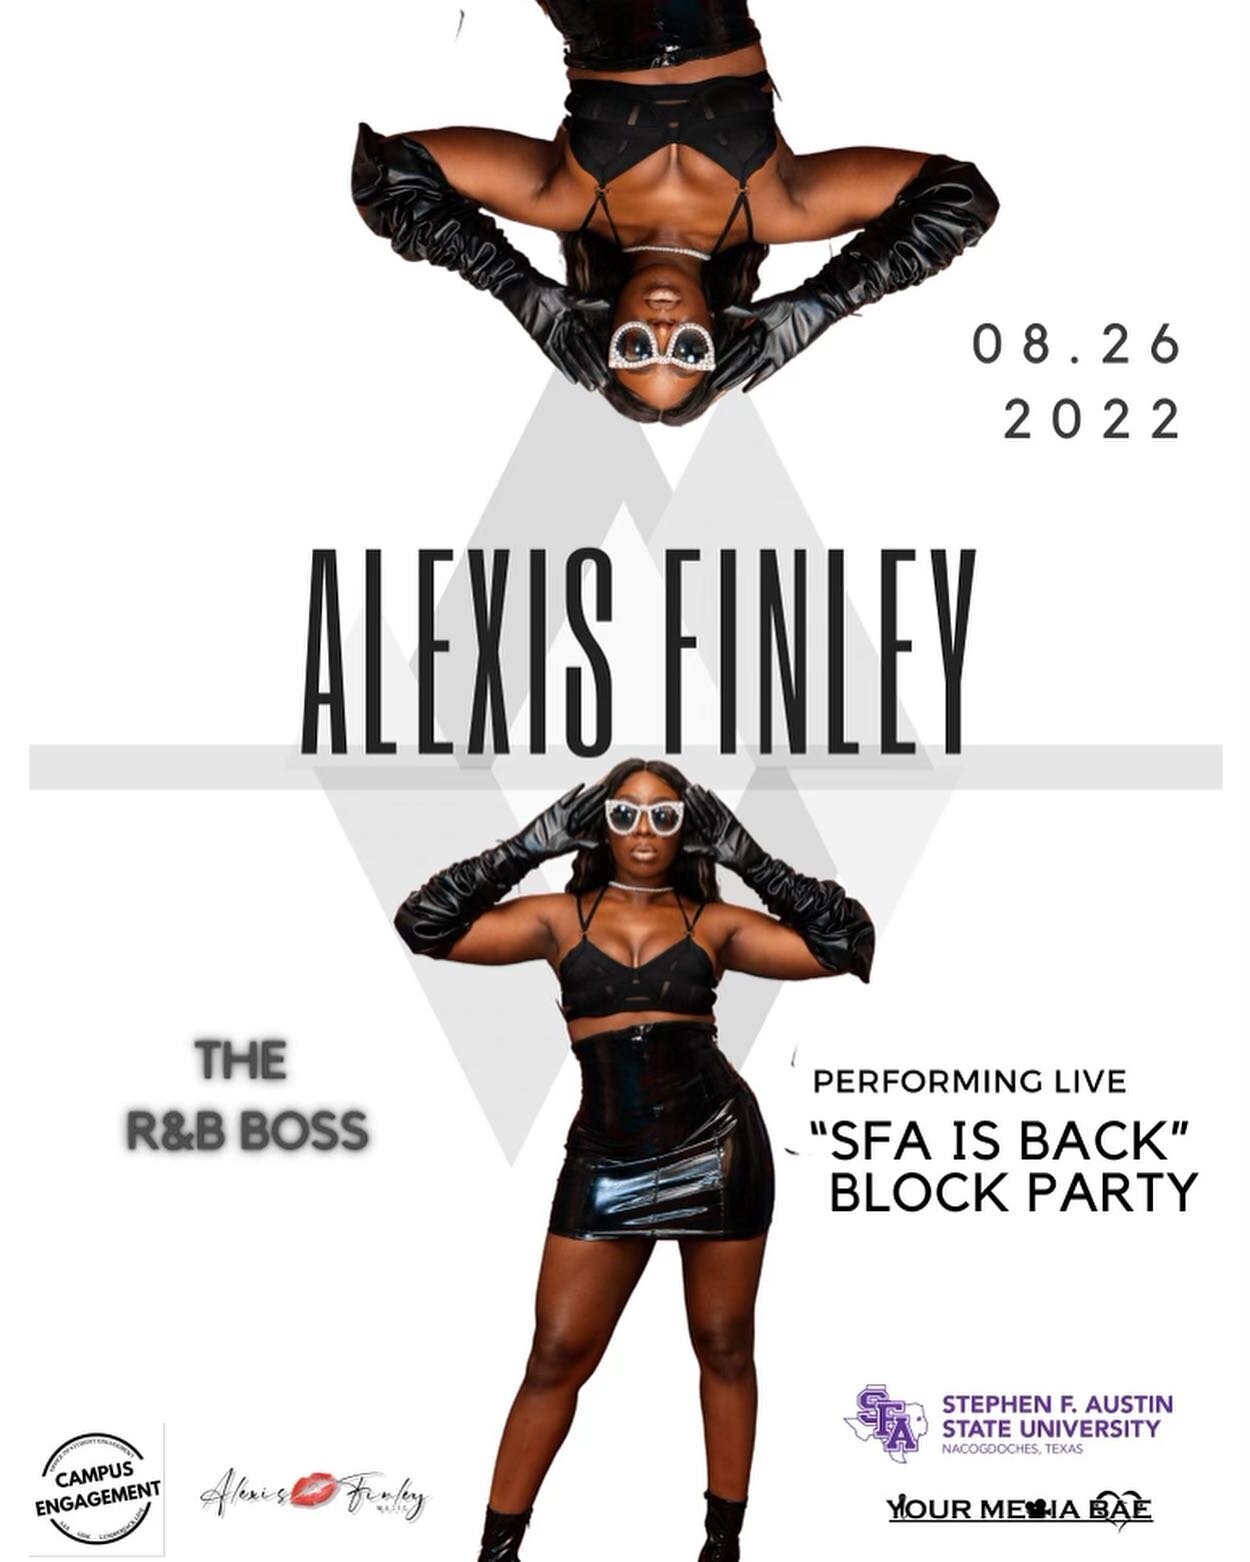 Pulling up on my Alma mater tomorrow for the SFA Block party💜💪🏾
.
.
#axeemjacks 
#sfa
#thernbboss
#youtubemusic
#theshaderoom
#rnbmusic
#Missjillscott
#Vocalupload
#perfect.vocals 
#Saucyvocals 
#singers
#NewMusicThursday
#Spotify 
#favoritesinger